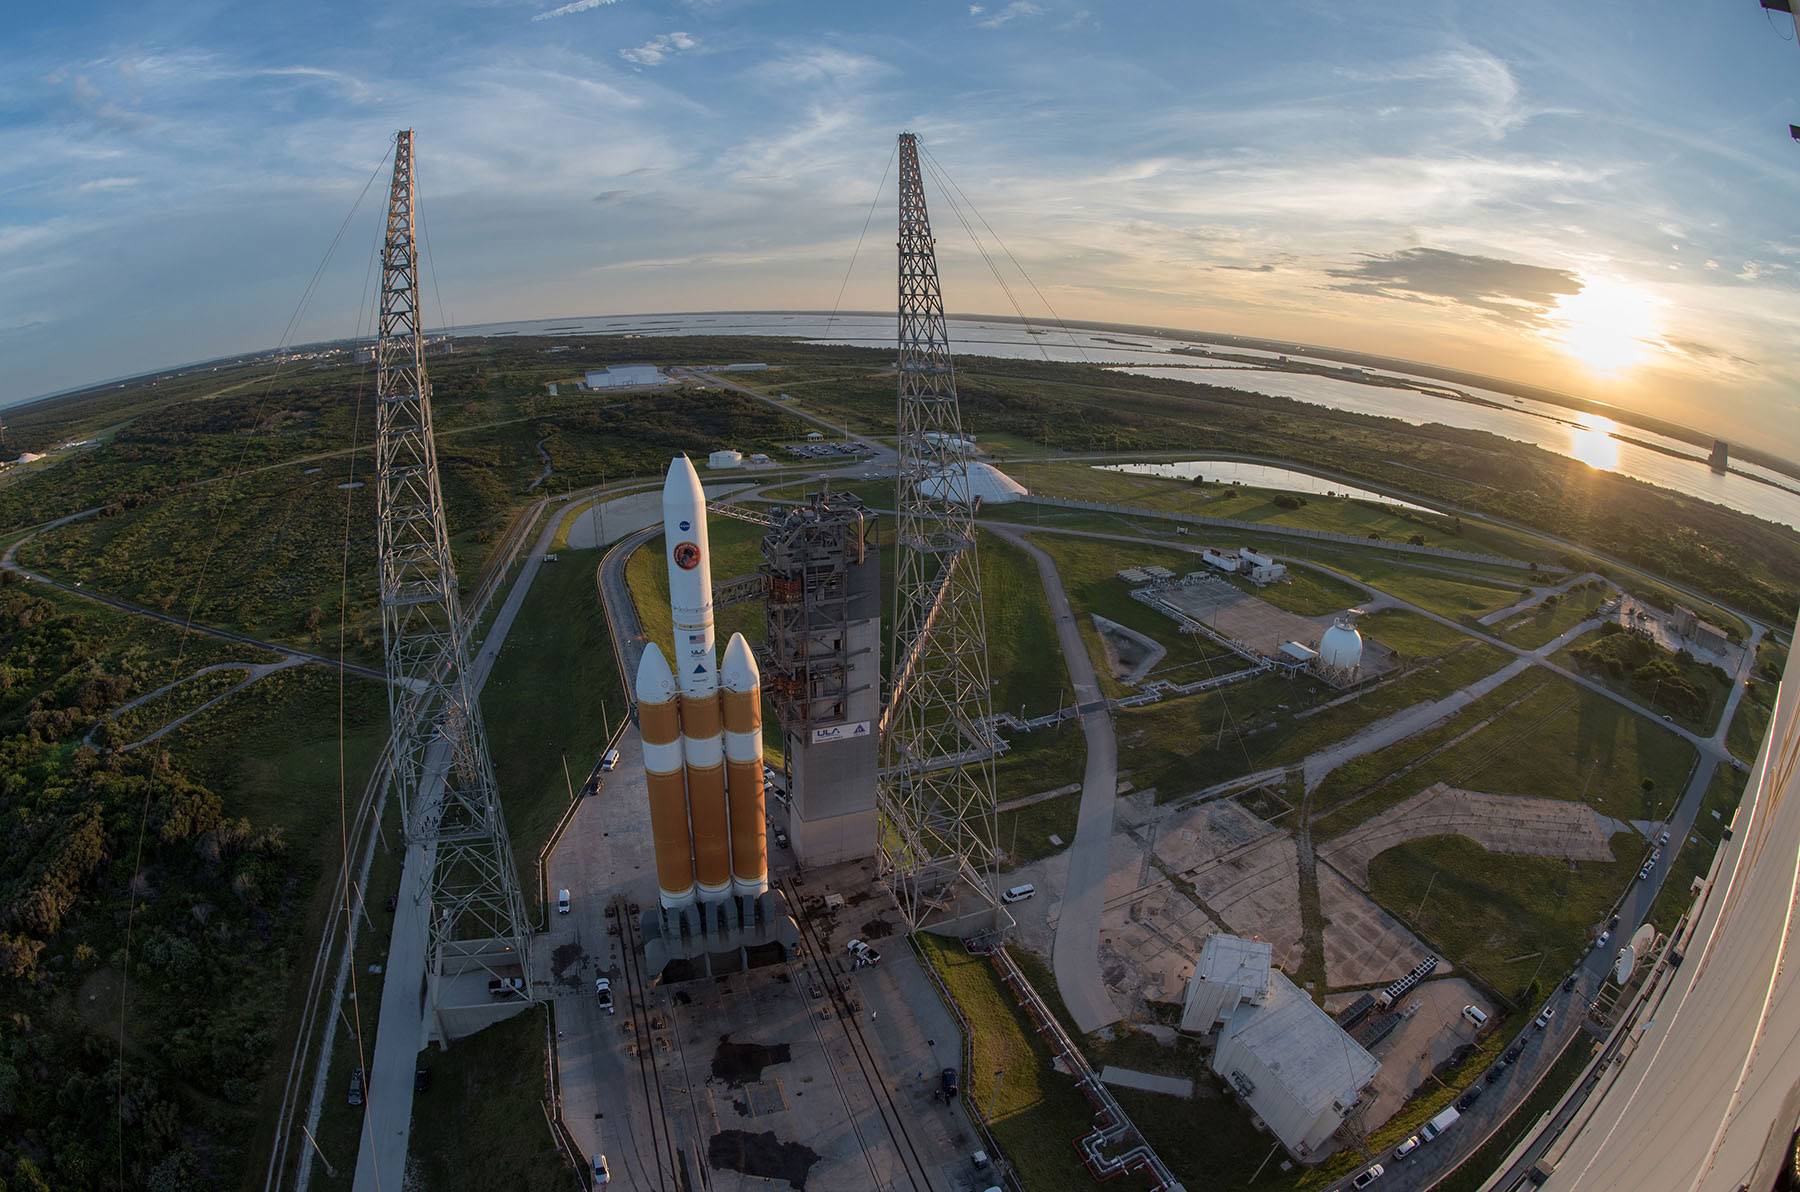 The rocket carrying the Parker Solar Probe sits on the launch pad